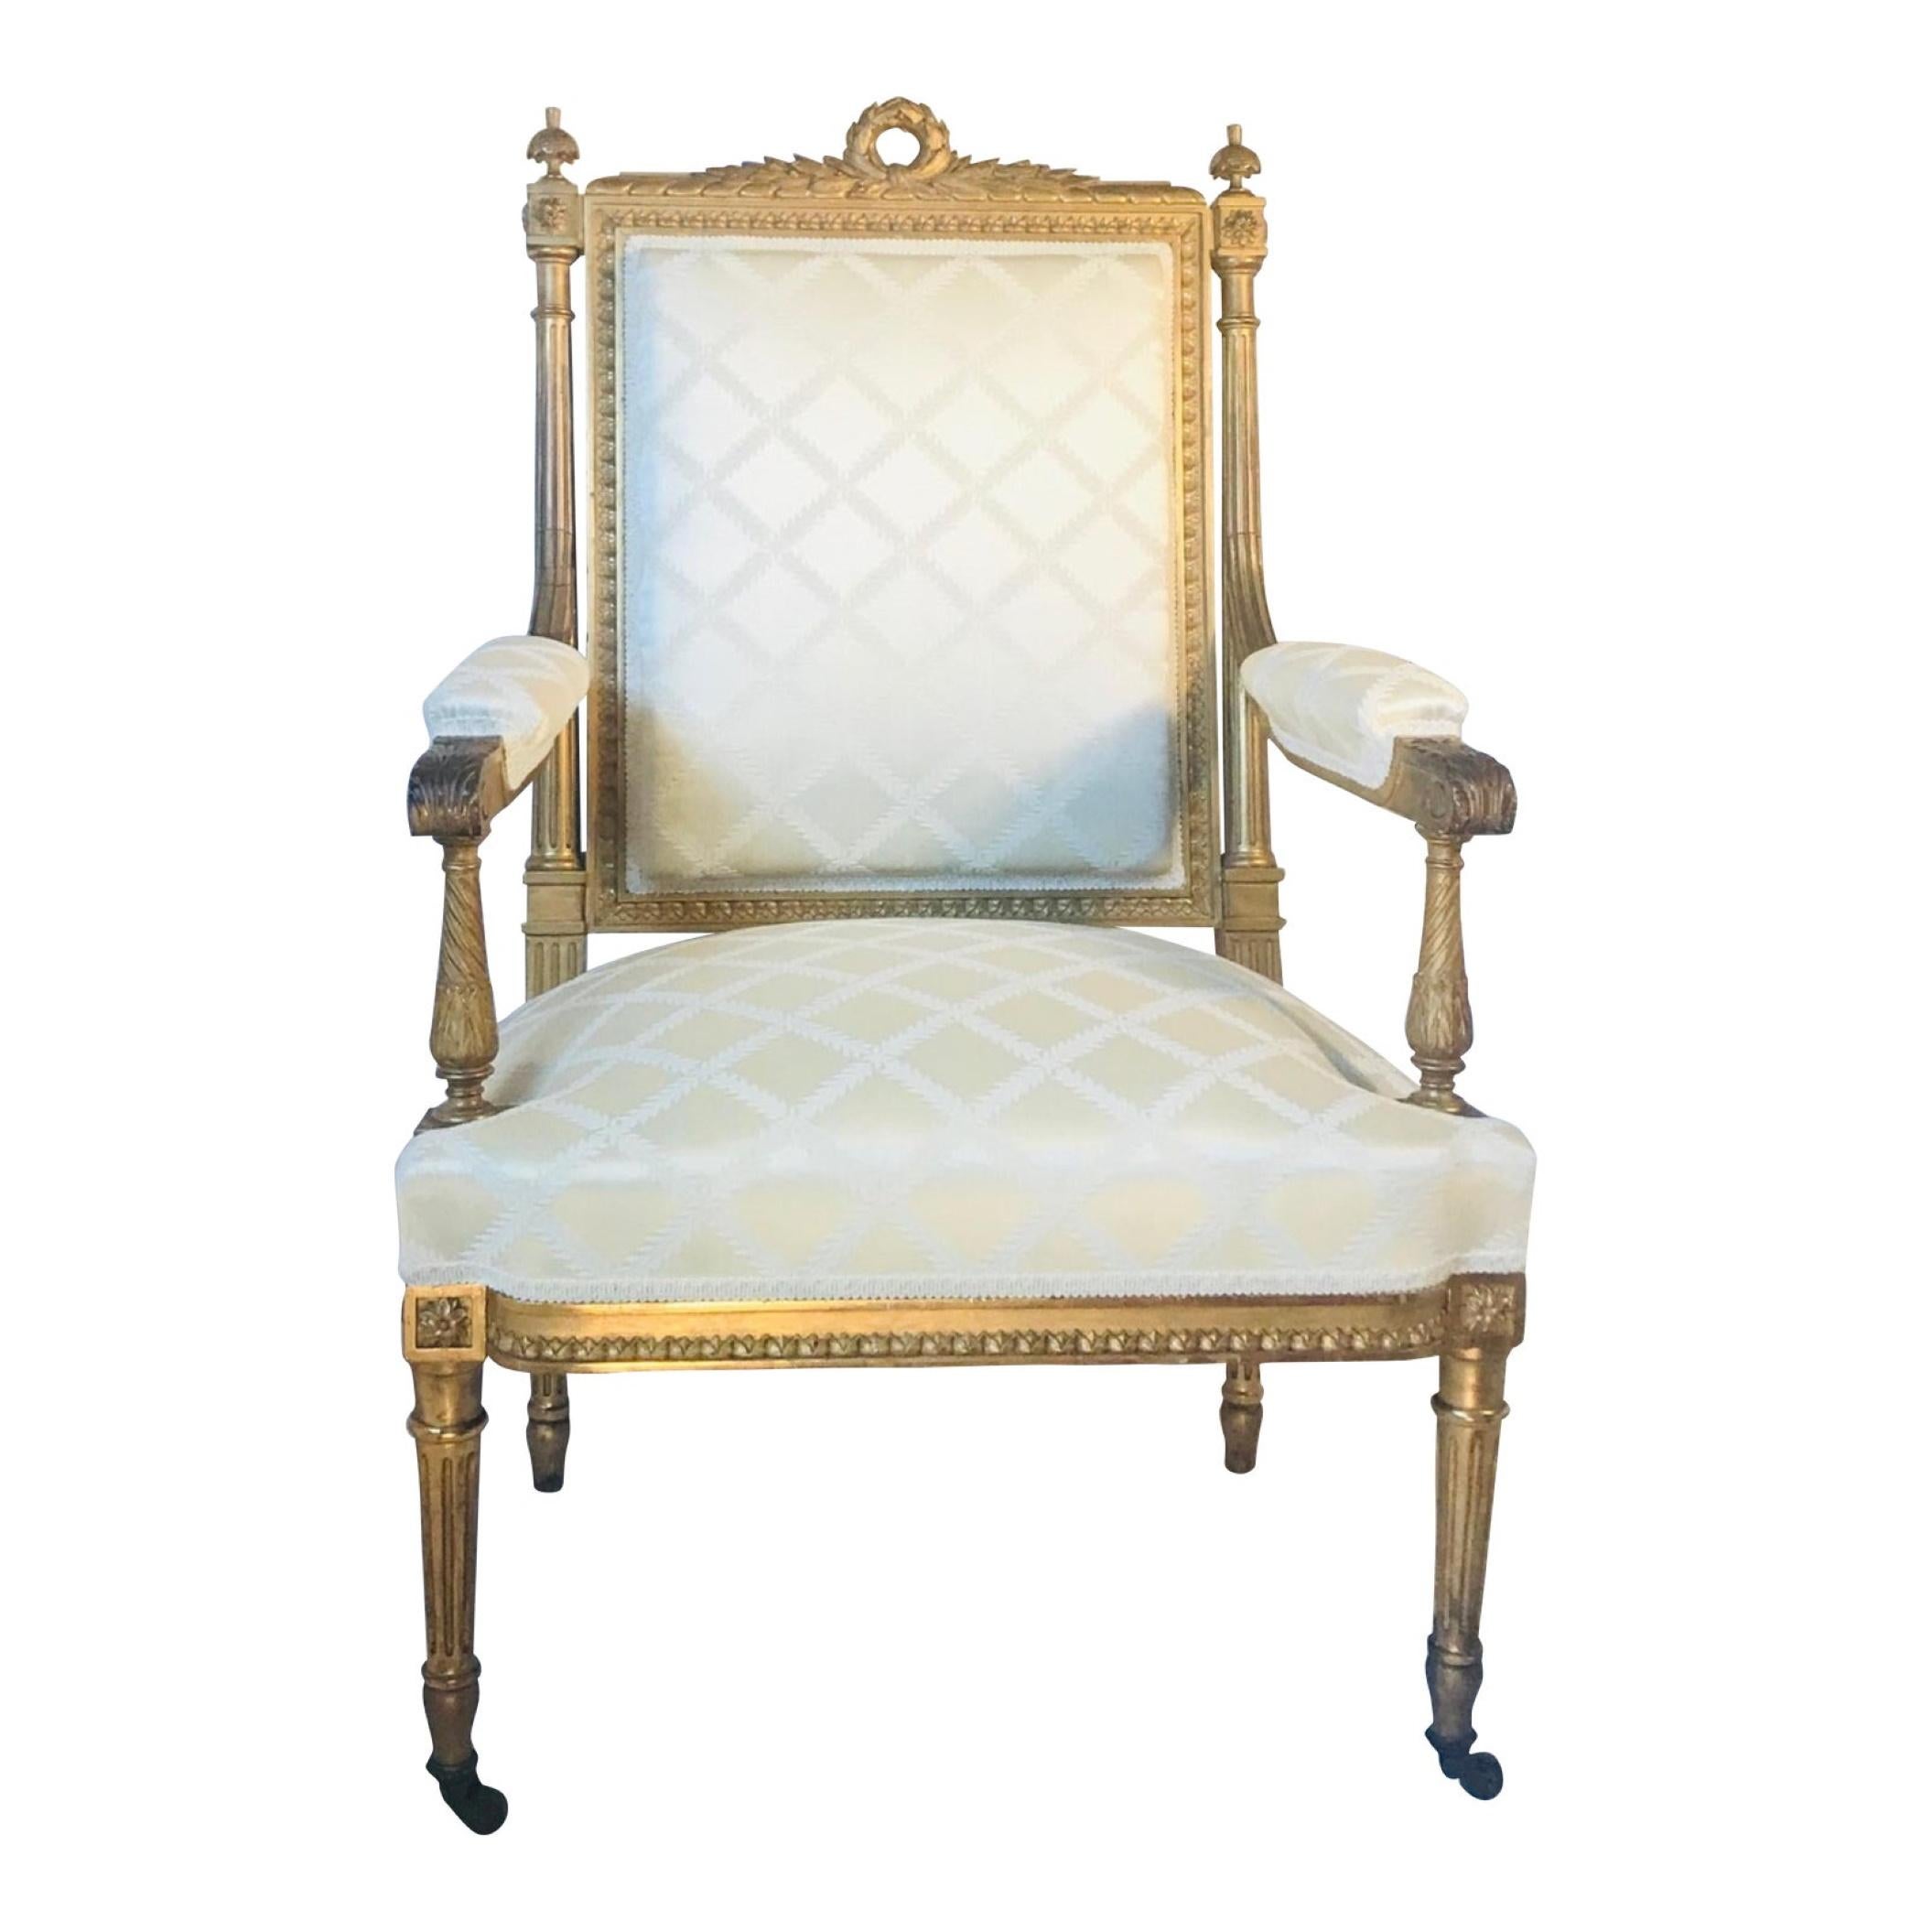 Antique French Louis XVI style armchair a la Reine after Georges Jacob, 19th century.

This beautiful Fauteuil is carved from walnut and gold leaf gilded. It is upholstered in champagne silk damask. The tapered fluted straight legs are resting on